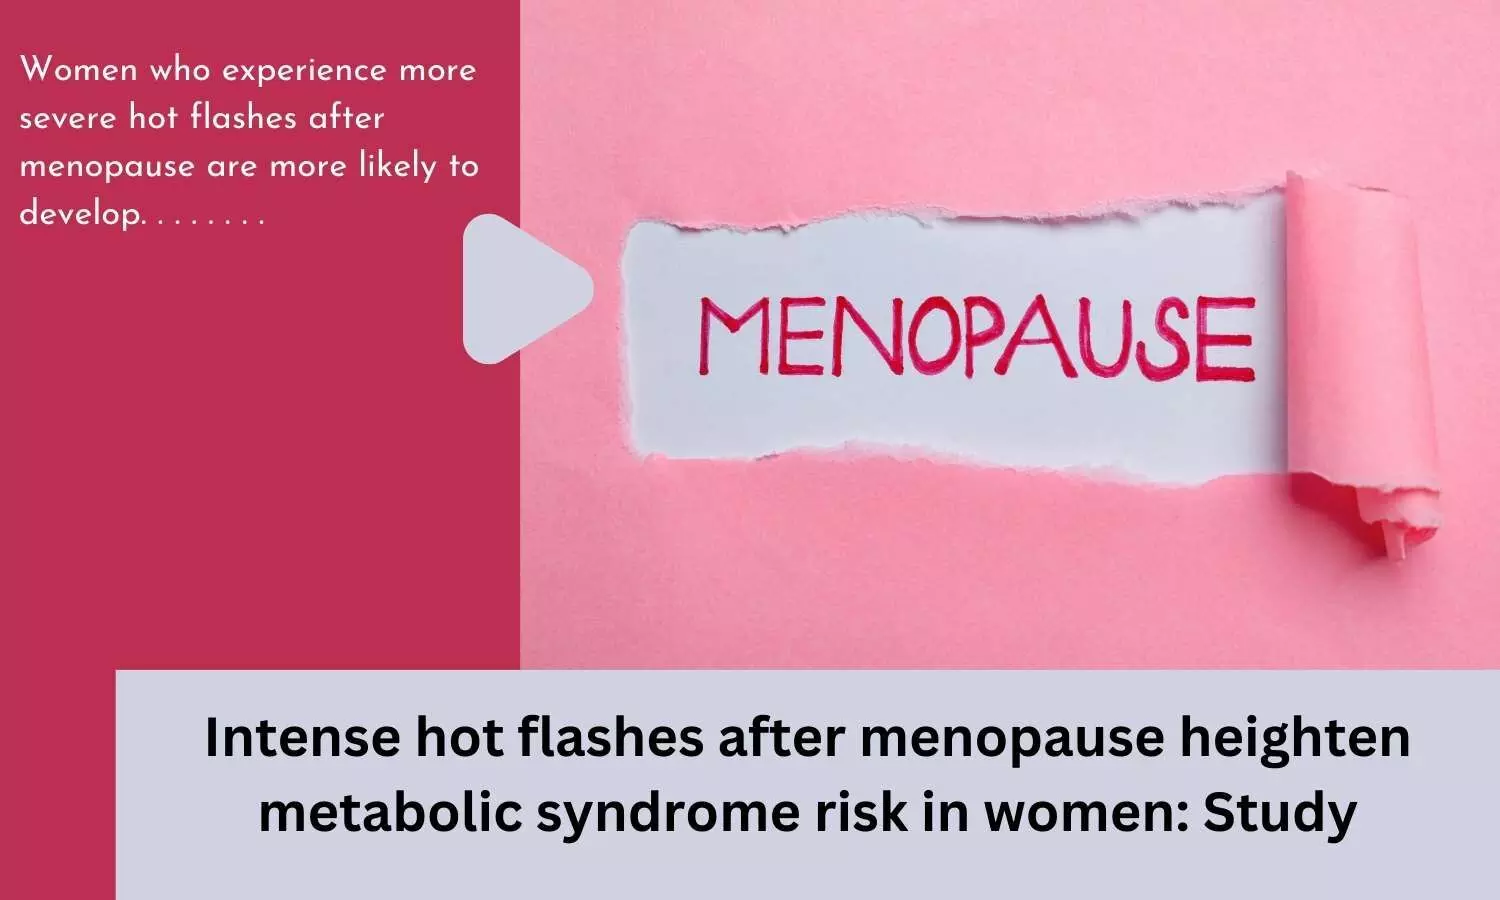 Intense hot flashes after menopause heighten metabolic syndrome risk in women: Study